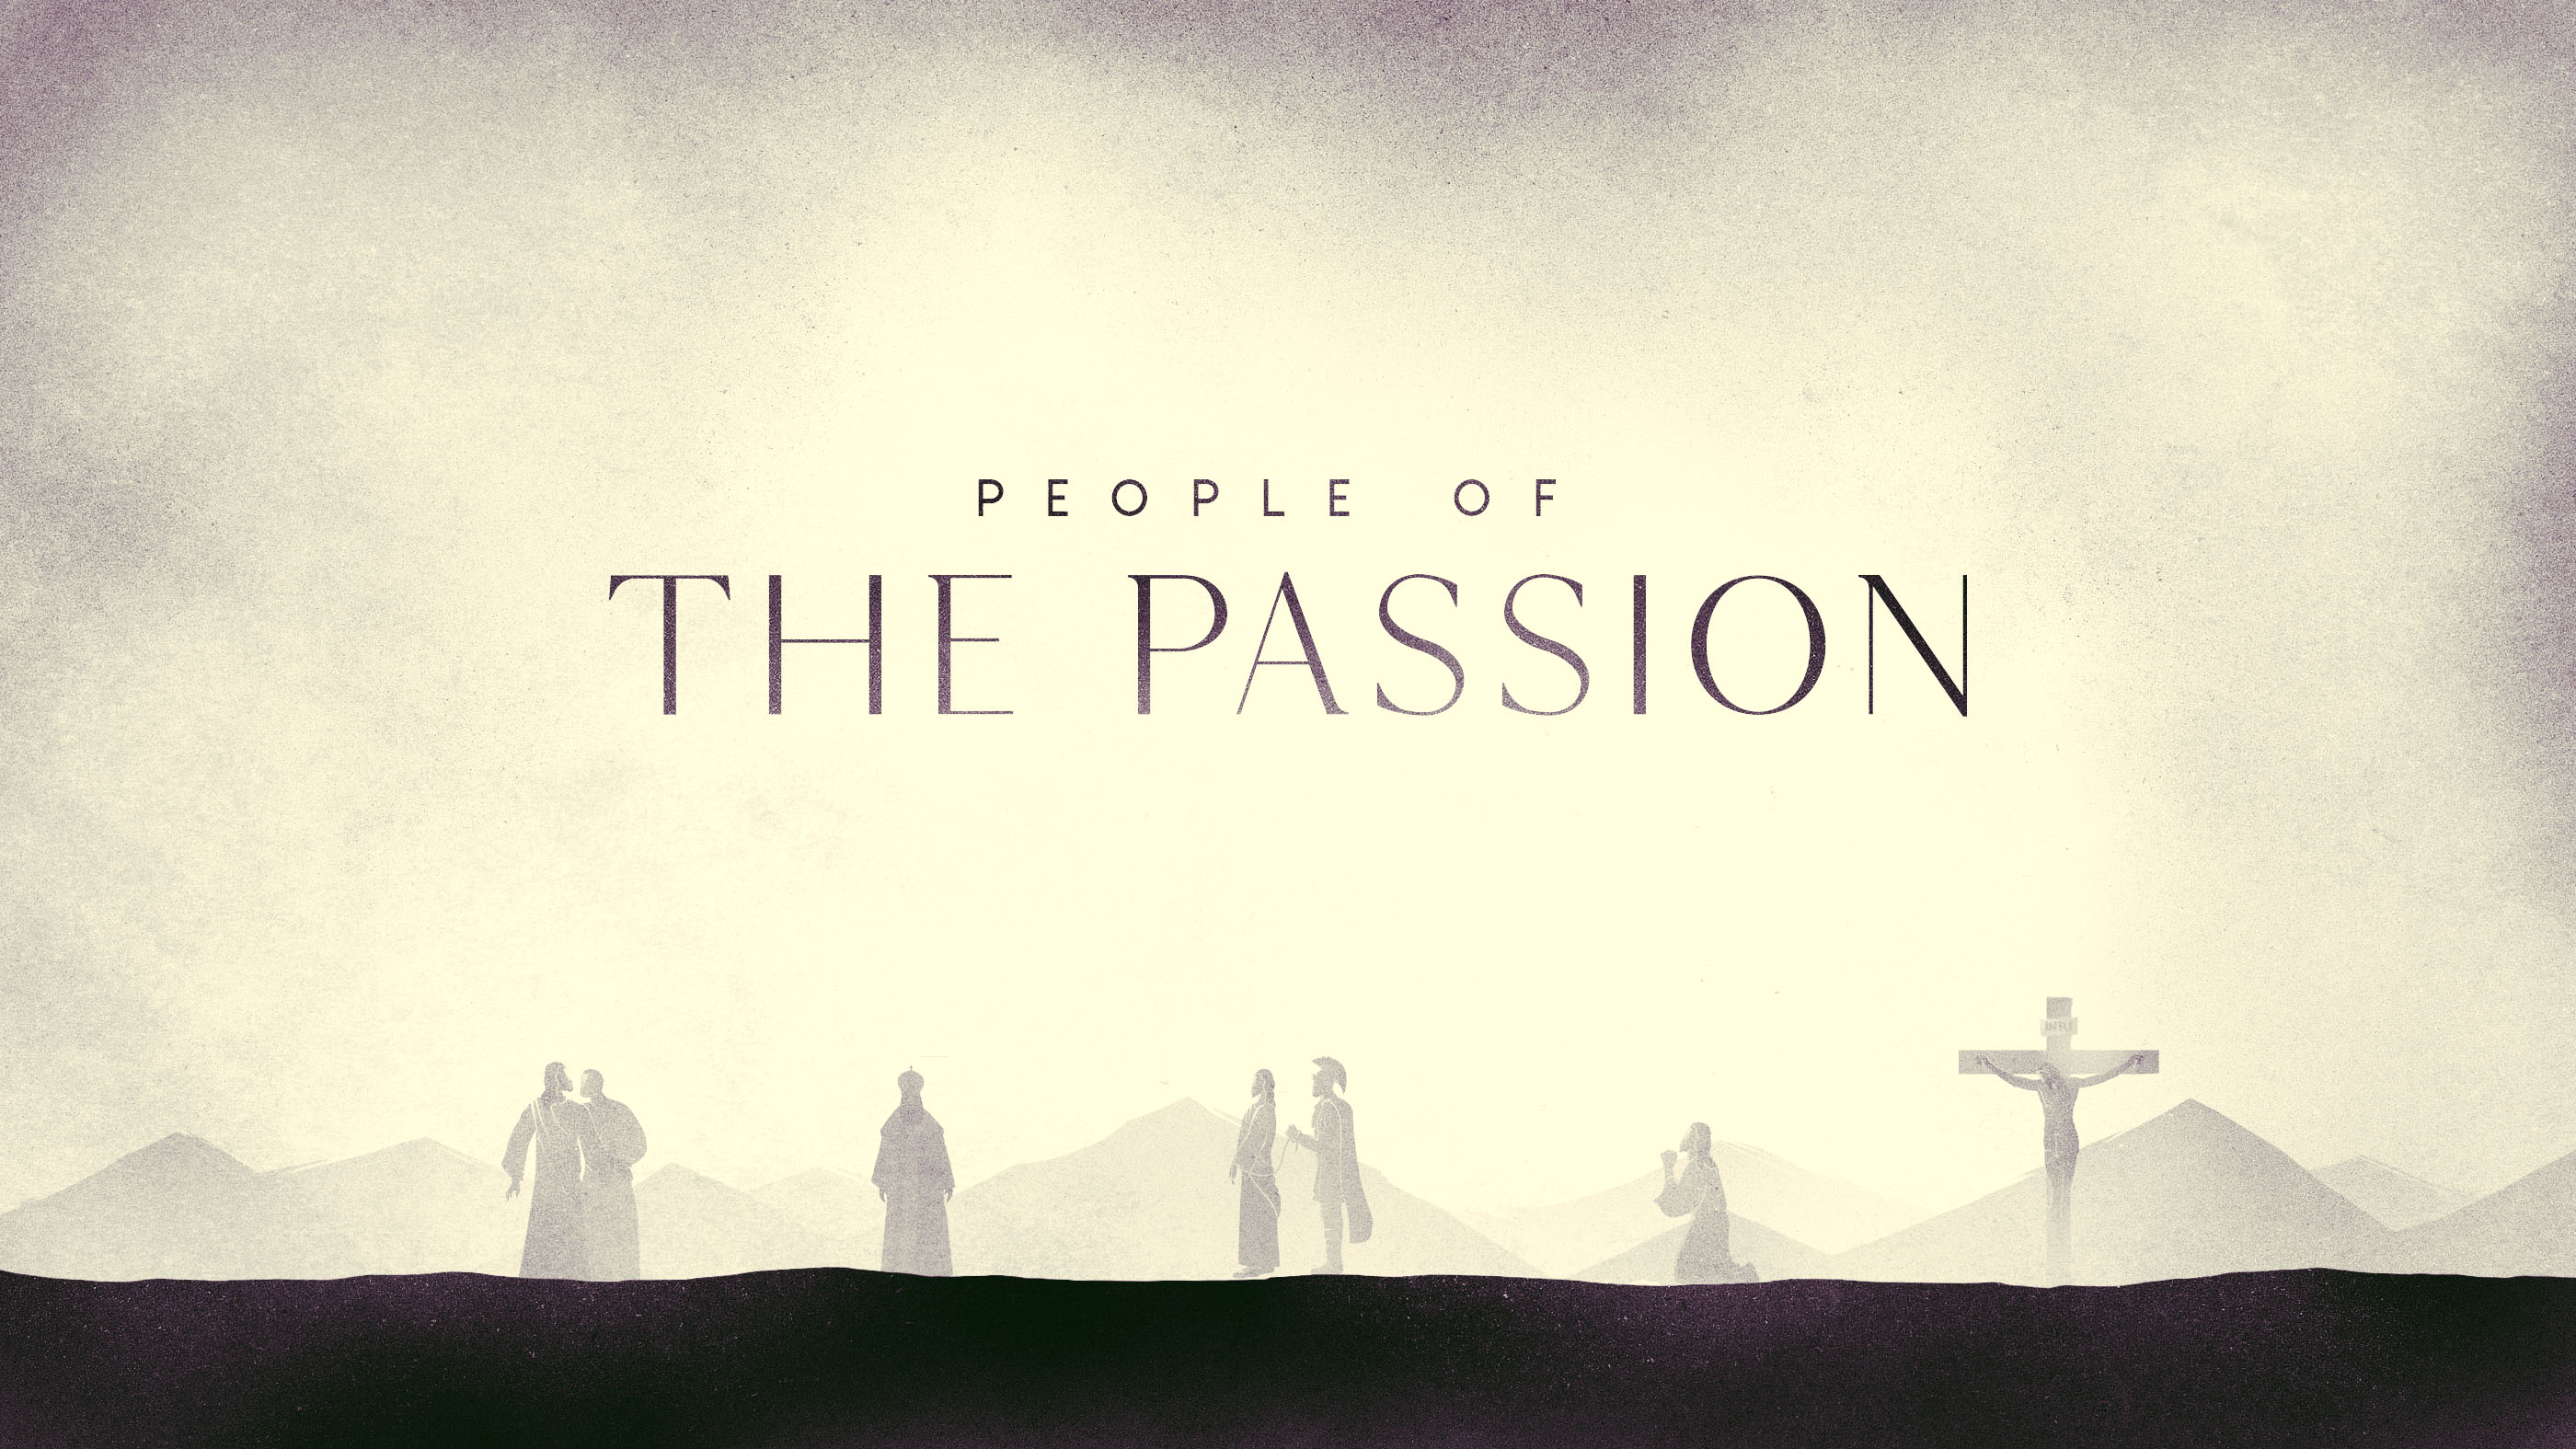 PEOPLE OF THE PASSION